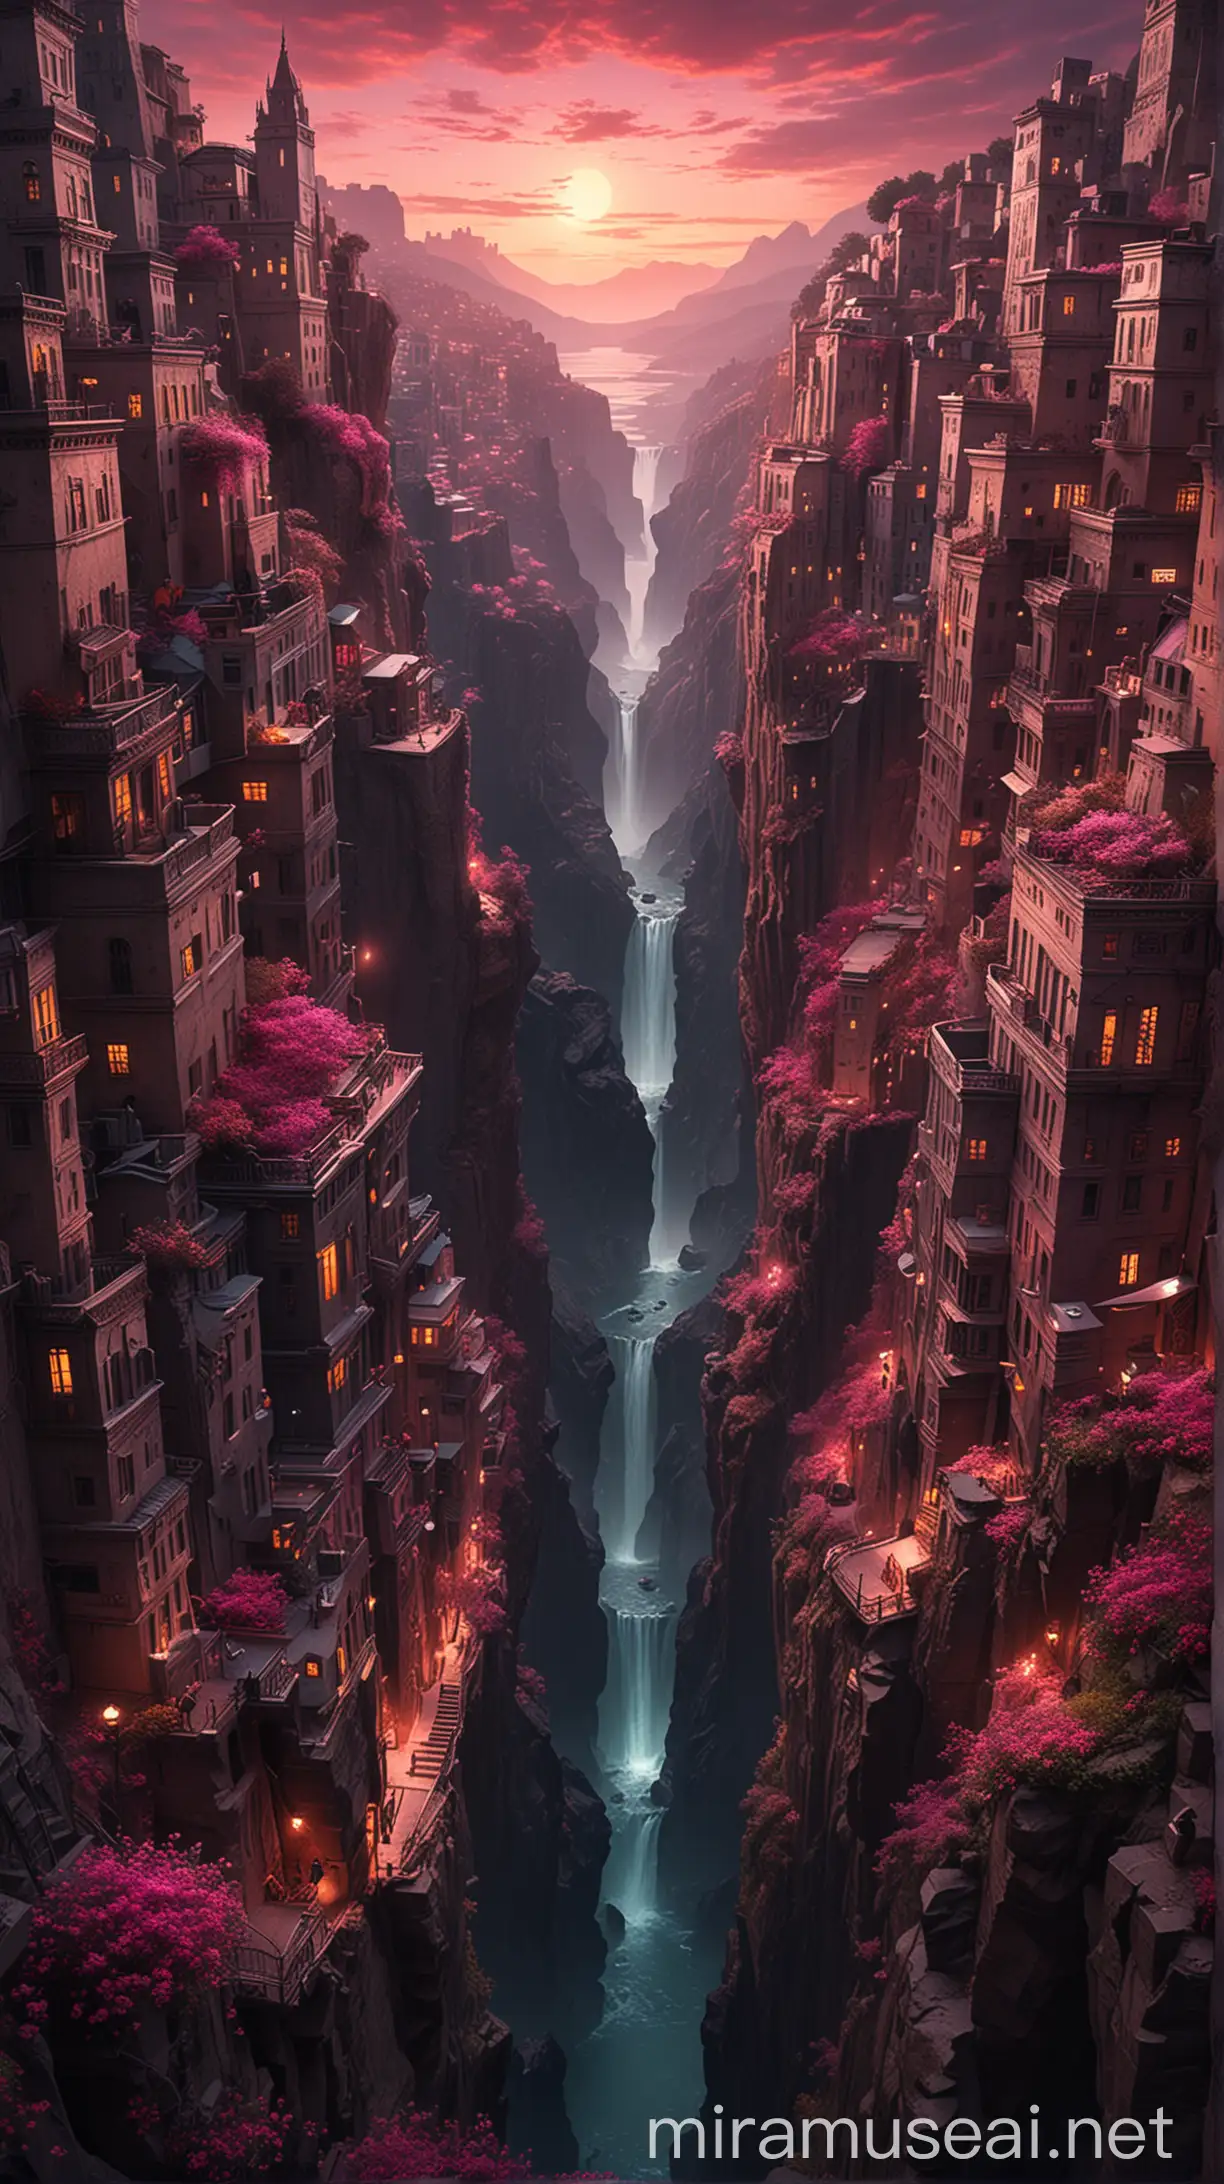 Mesmerizing Dream City at Sunset with Figure on Cliff